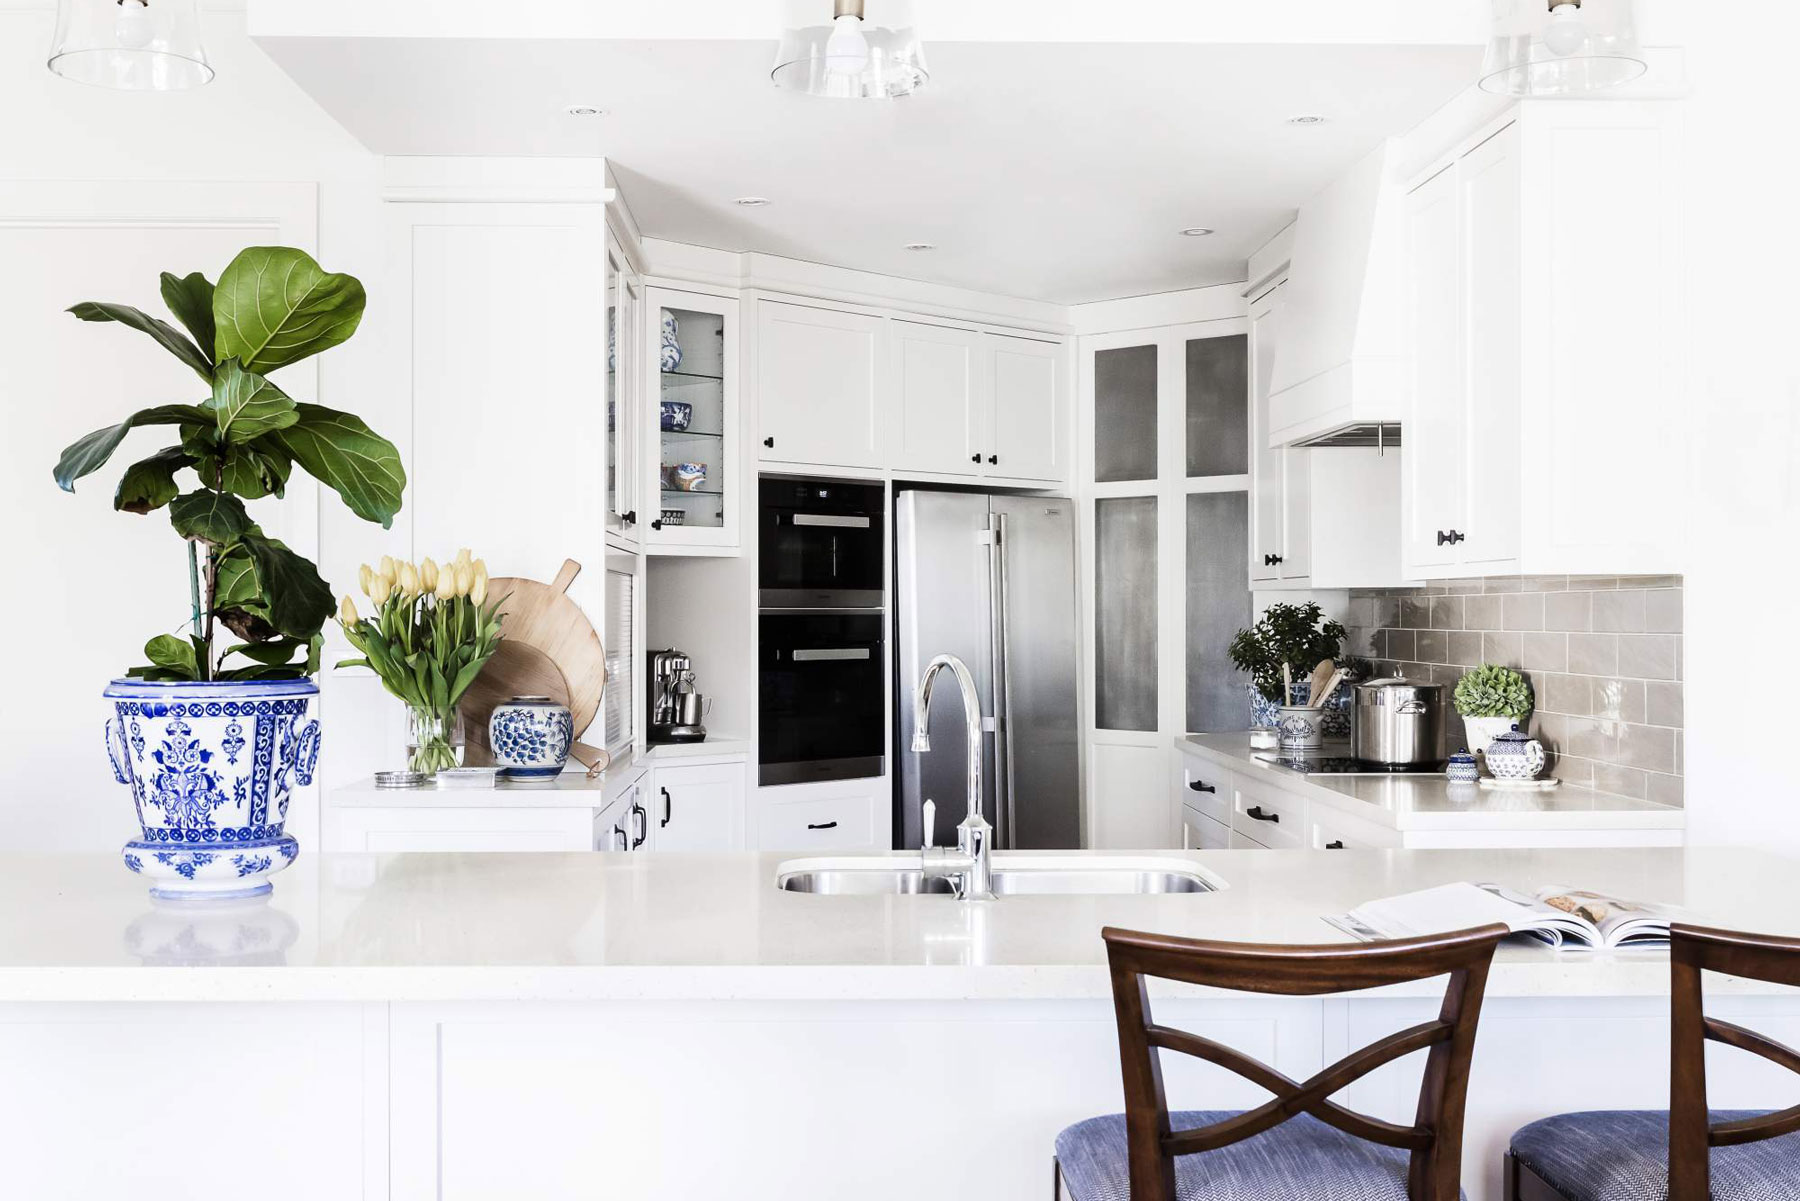 white kitchen mixed metal finishes silver and black warm brown hamptons style design canberra